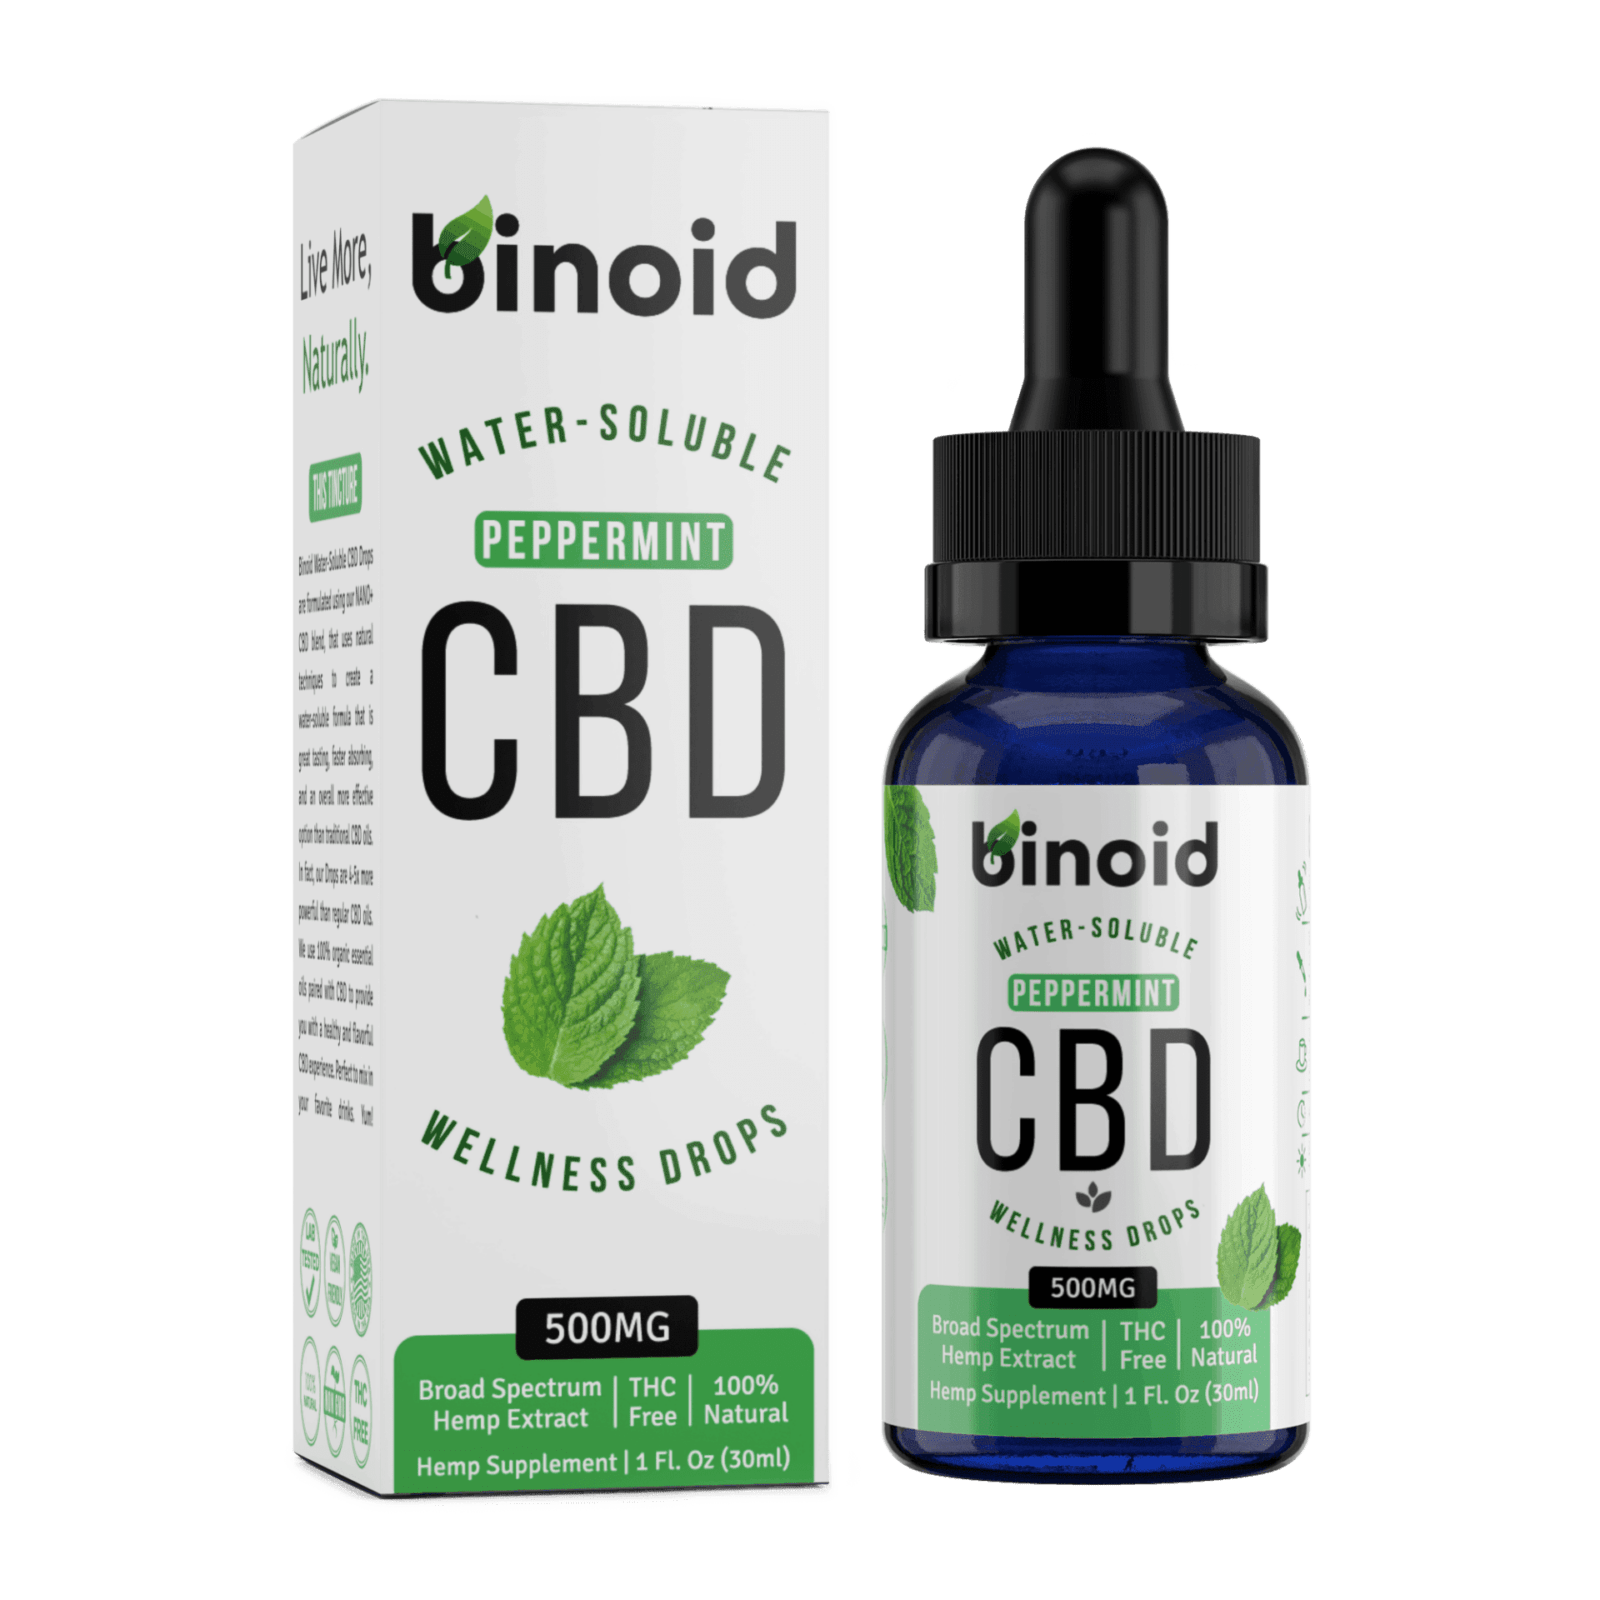 Binoid Water-Soluble CBD Drops-Peppermint box and bottle